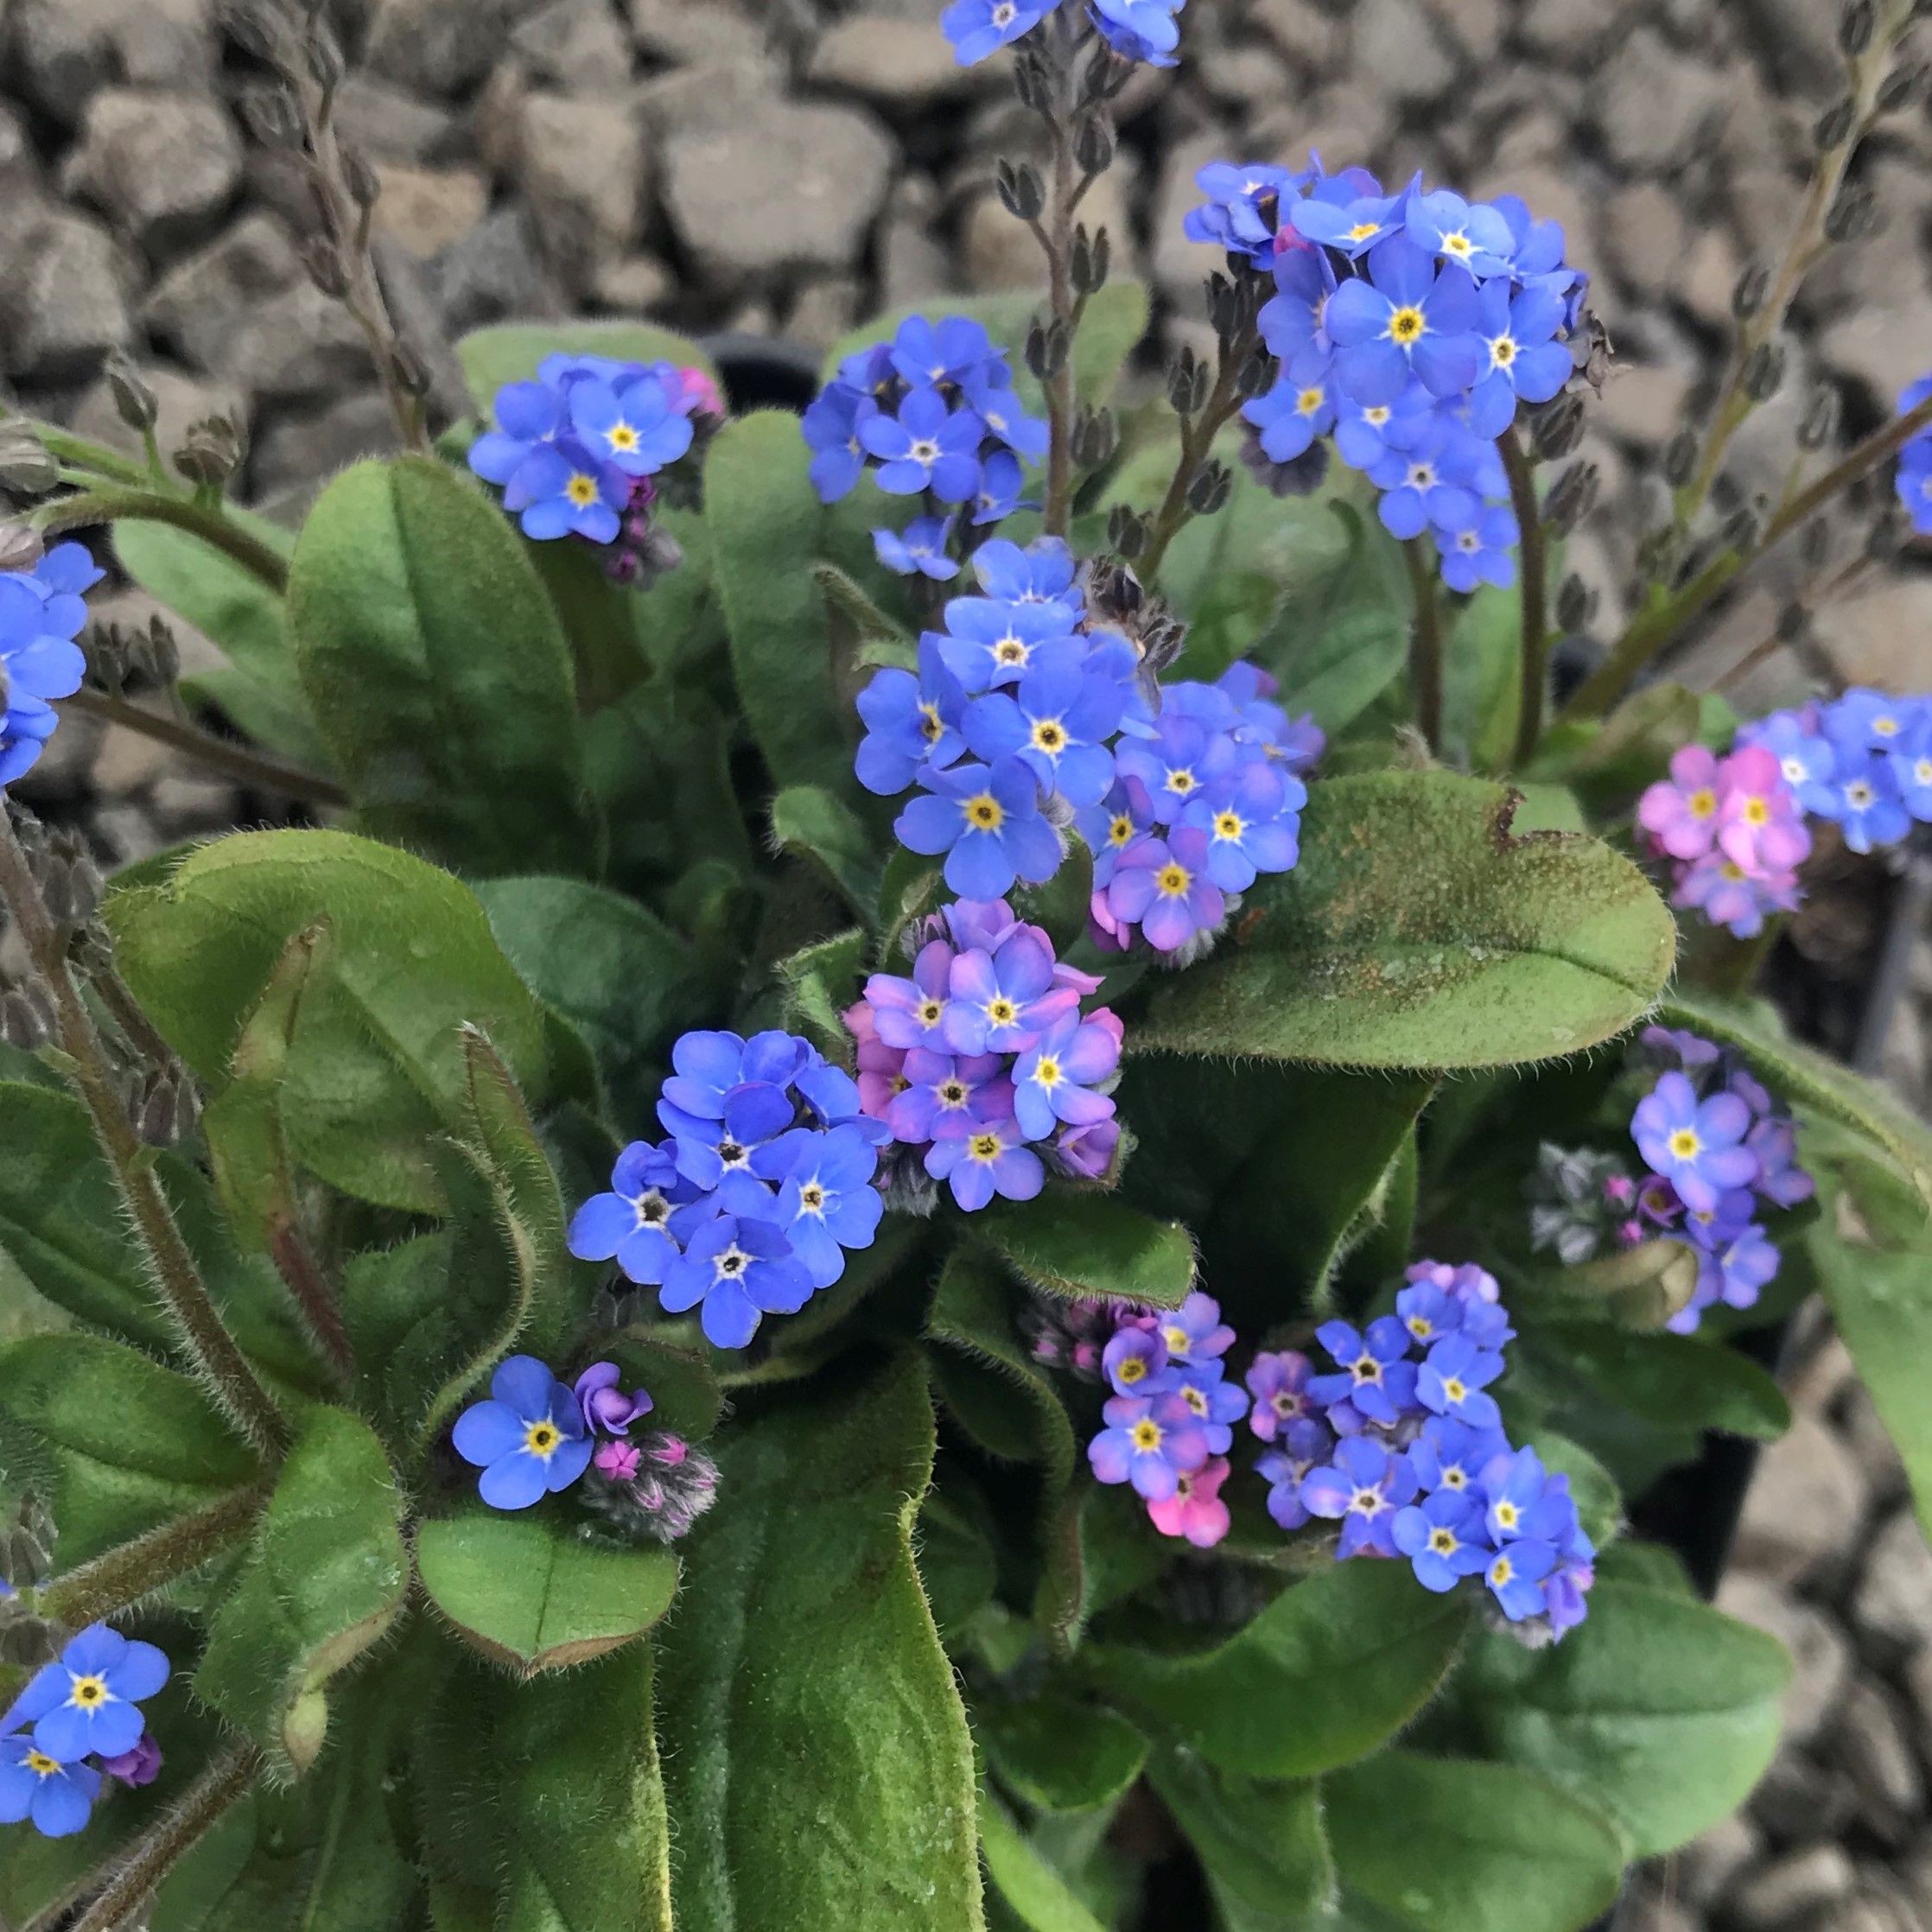 Flowers - Forget-Me-Not